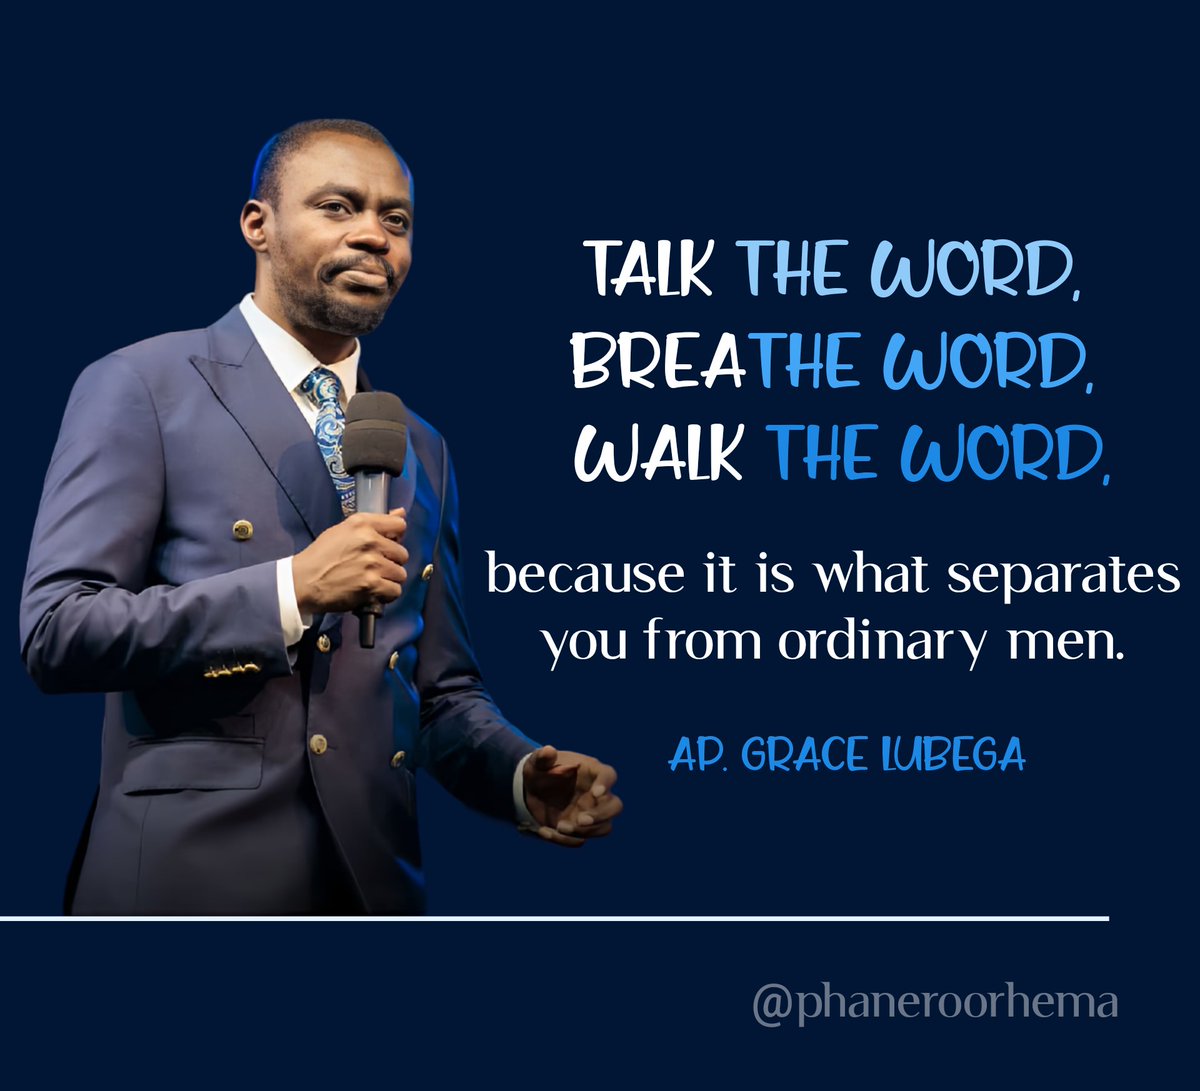 Talk the Word, breathe the Word, walk the Word because it is what separates you from ordinary men. Every time you manifest the truths in the Word, it is the Word cutting asunder and making distinction between you and the men of this world. Ap. Grace Lubega #PhanerooRhema